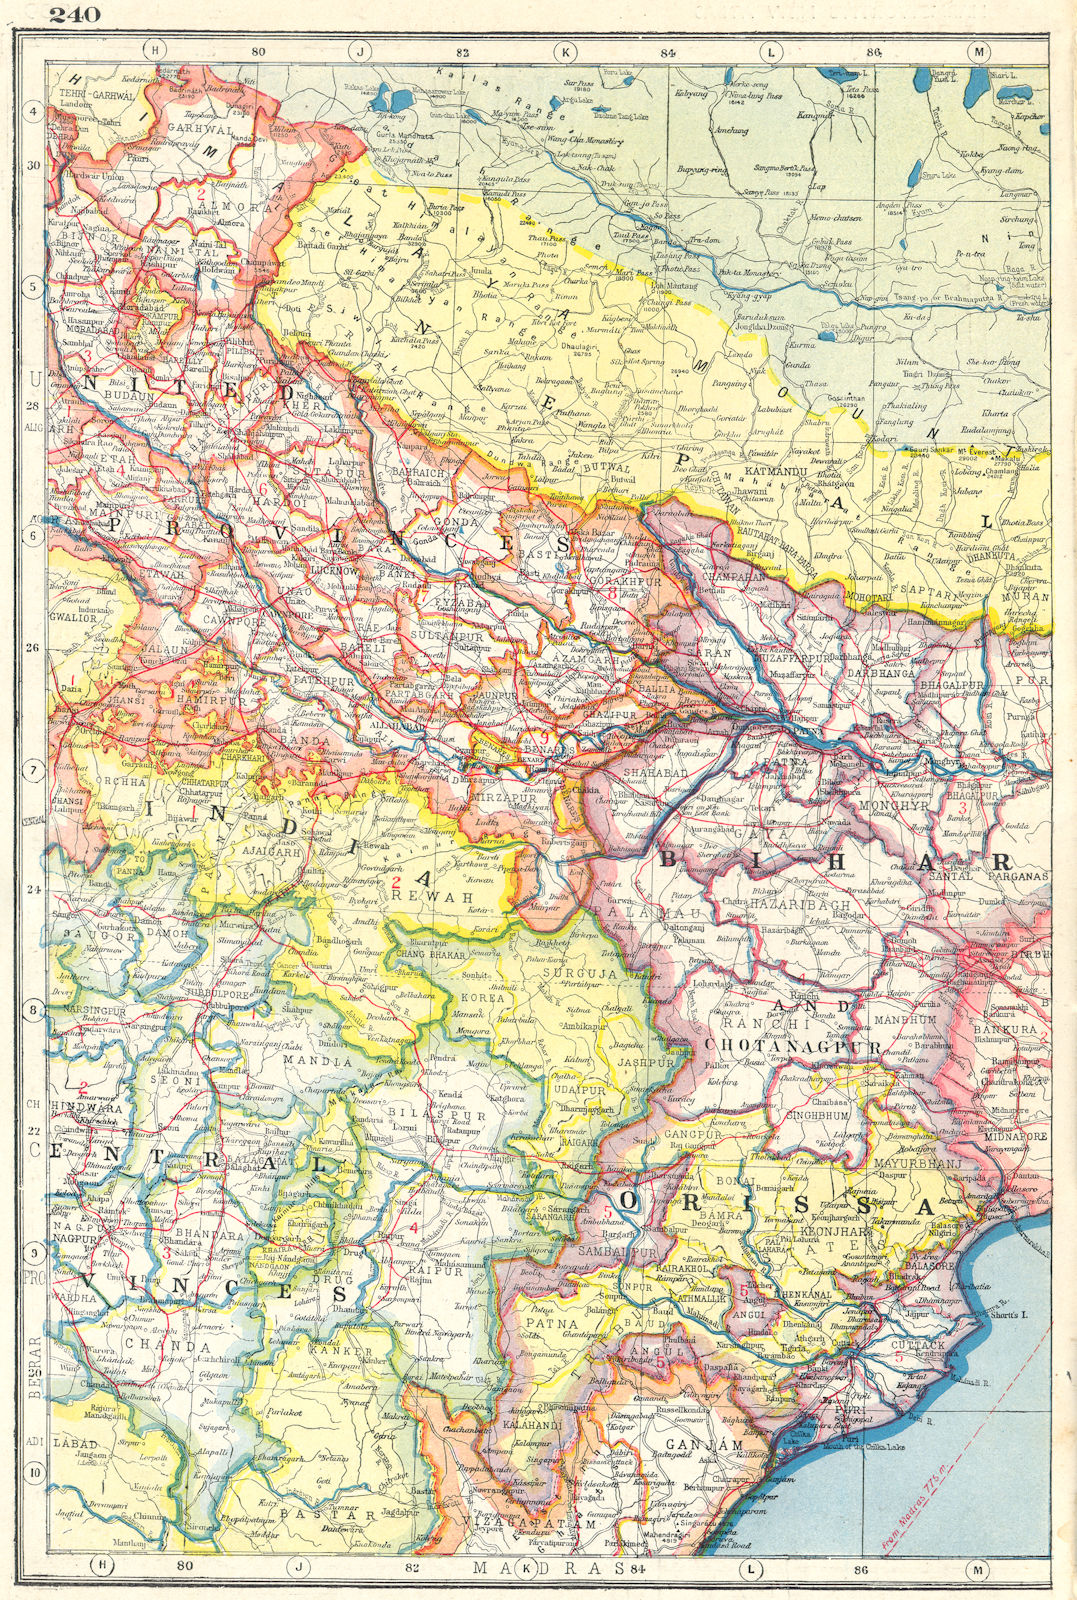 INDIA NORTH EAST. Orissa Bihar United & Central Provinces Nepal 1920 old map